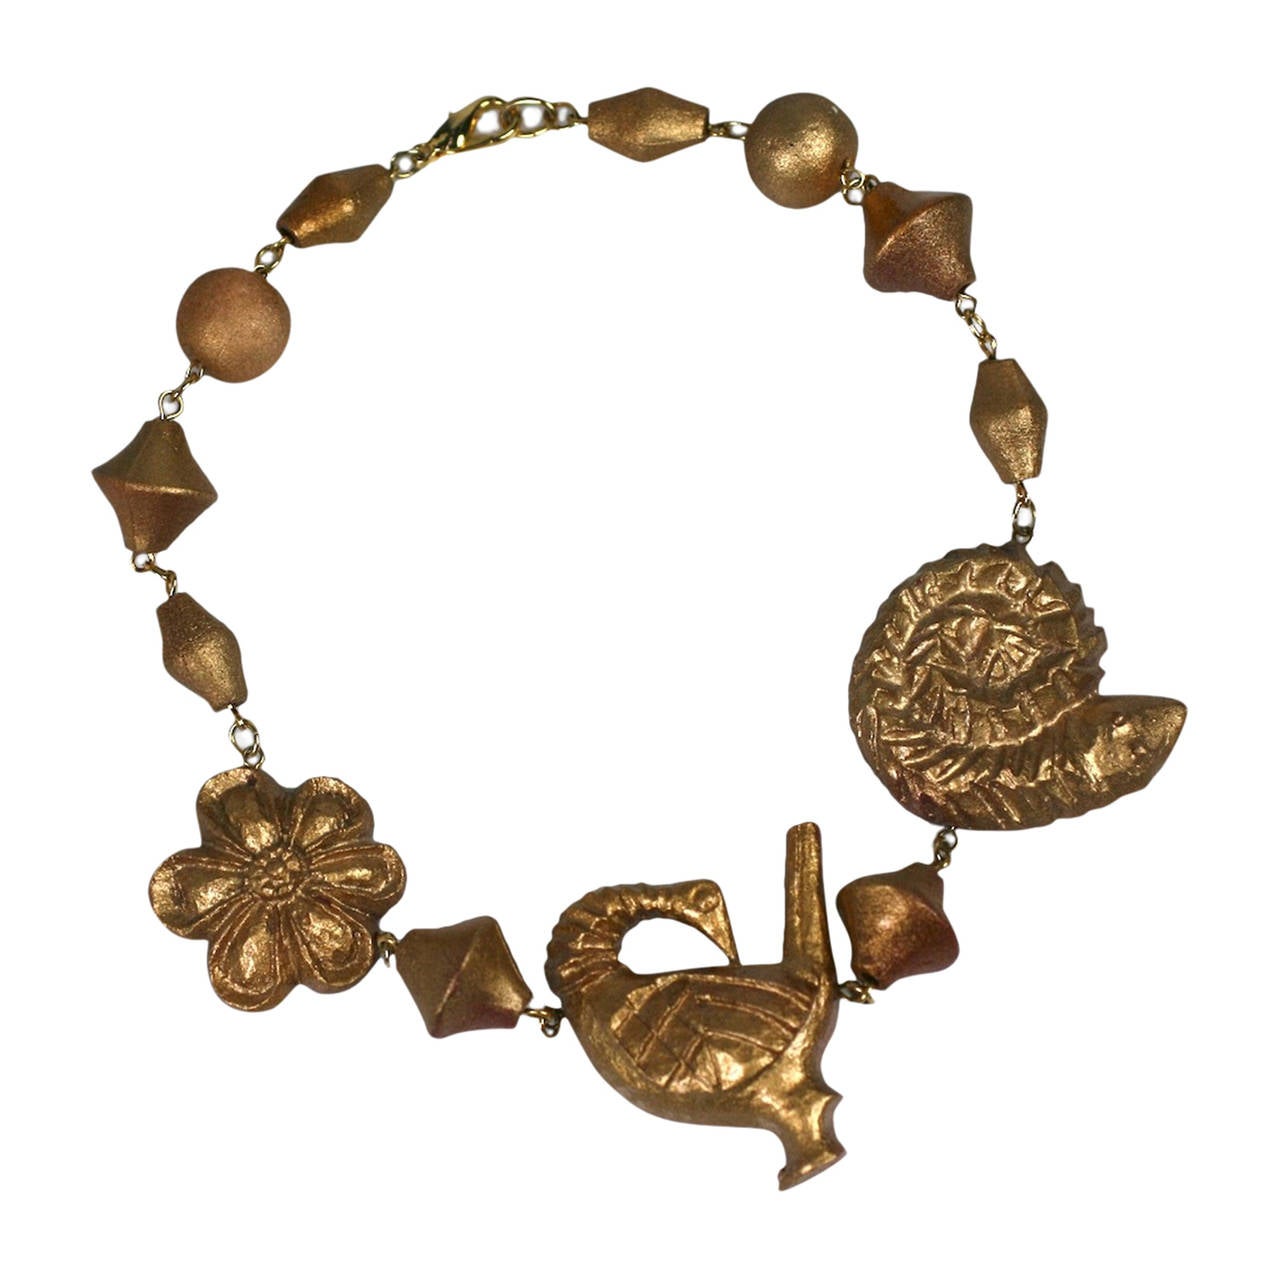 Kenzo Carved and Gilded Figural Necklace